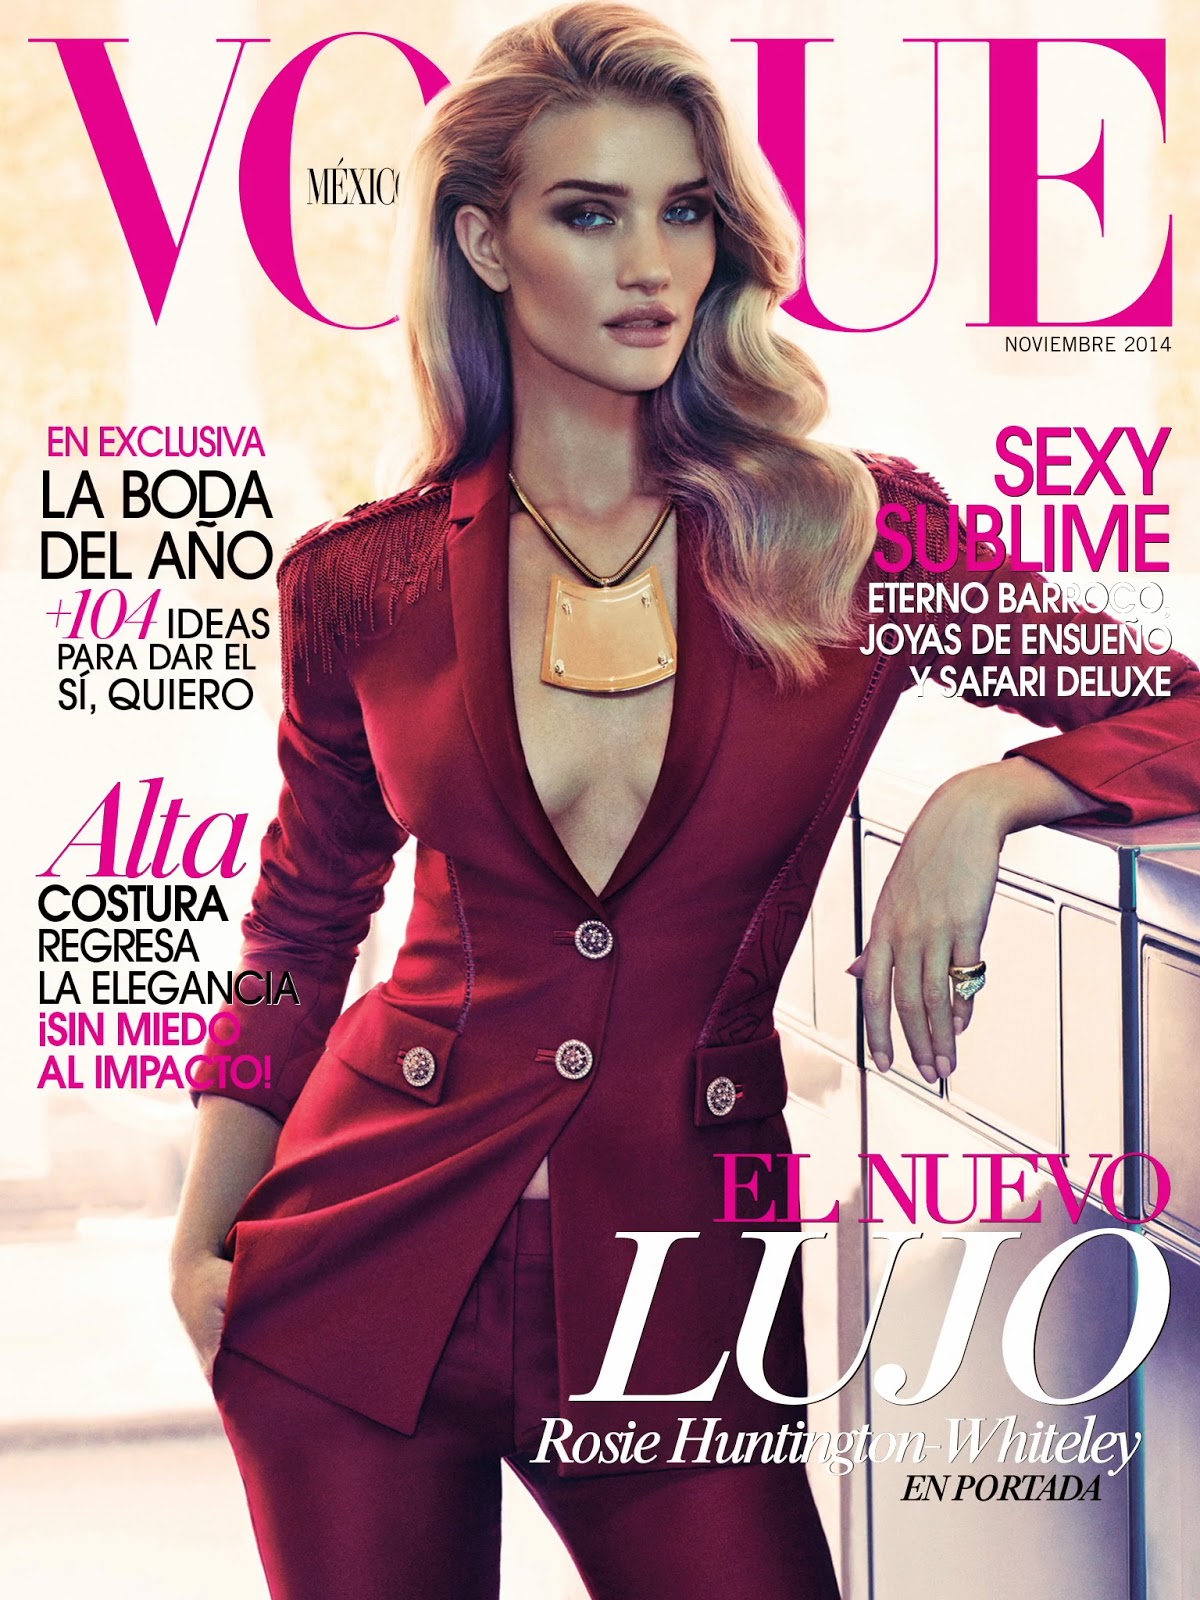 Beautiful Blonde Model Rosie Huntington-Whiteley Modeling For The Cover Of Vogue Mexico Modeling As One Of The Highest Paid Models In The World. Beautiful Hair And Makeup Looks For The Spring And Summer Seasons.